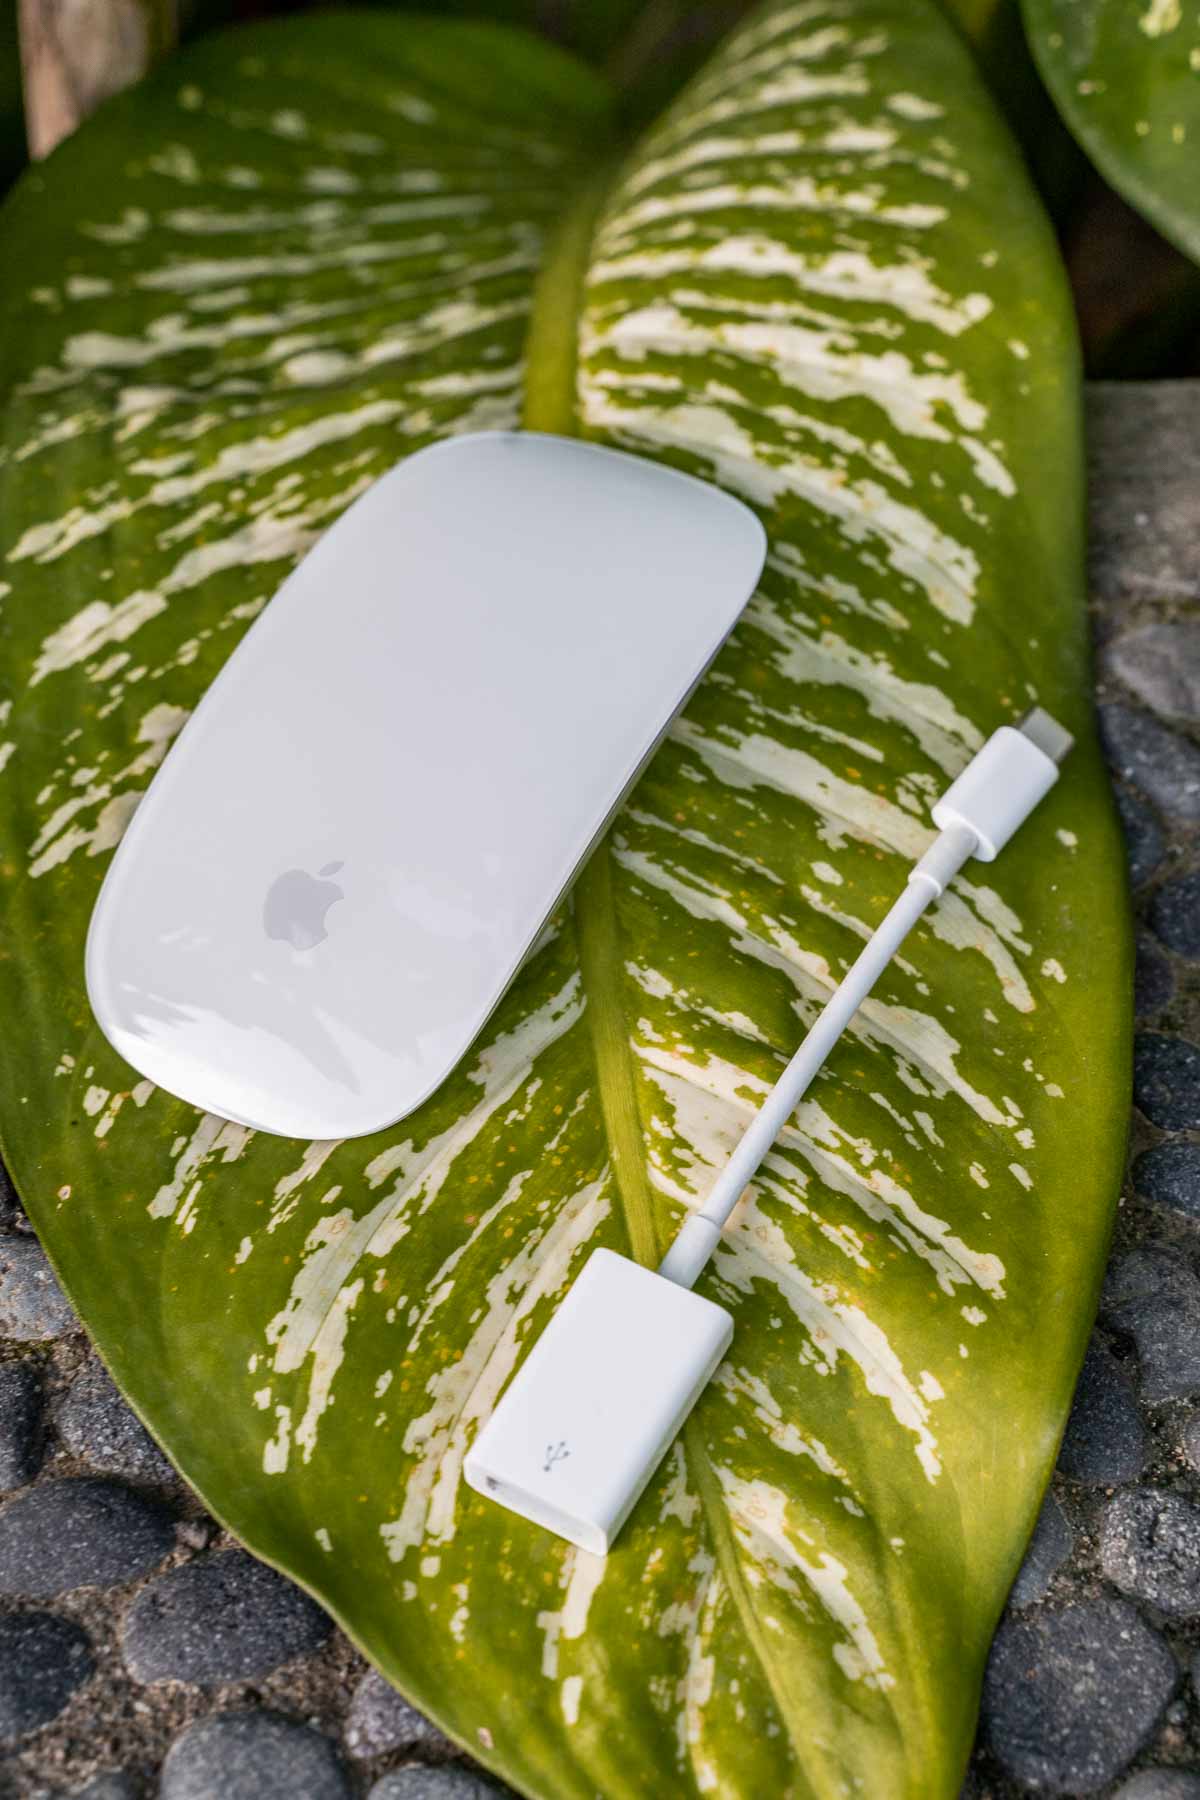 Magic Mouse and USB-C to USB Adapter for Macbook Pro